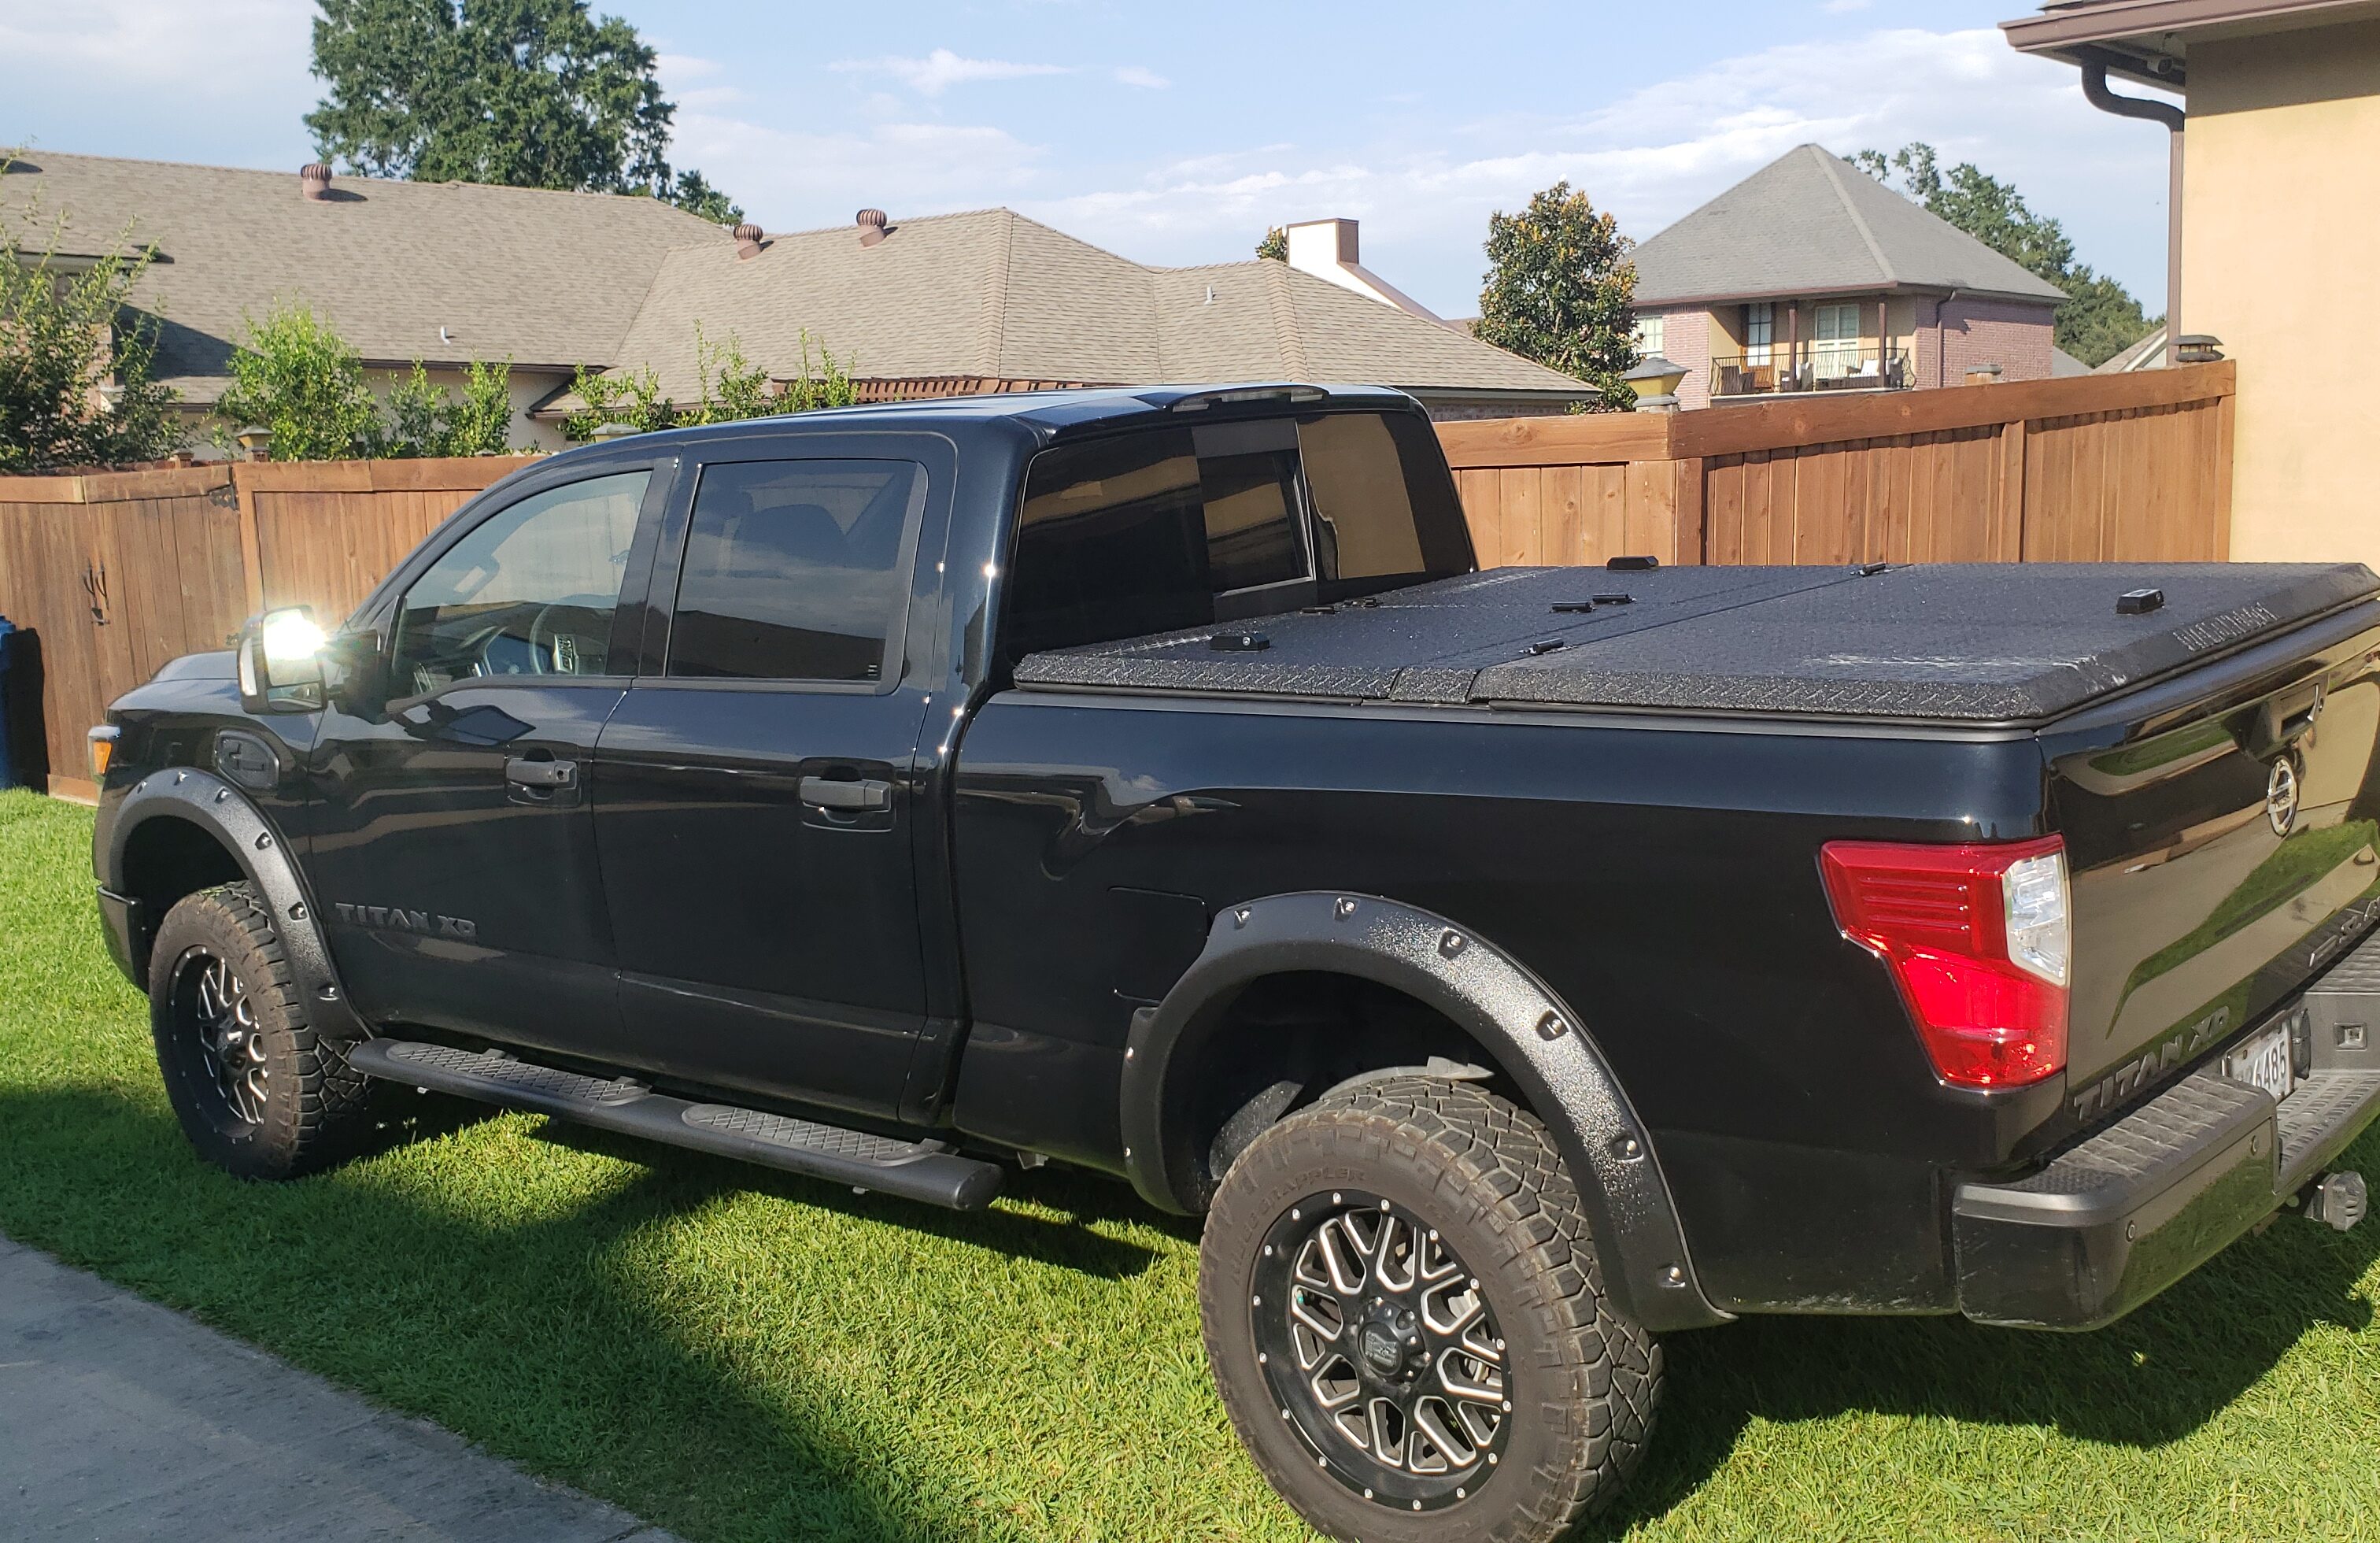 Diamond Back 270 tonneau cover for 2018 Nissan Titan XD with 6’7″ long bed.